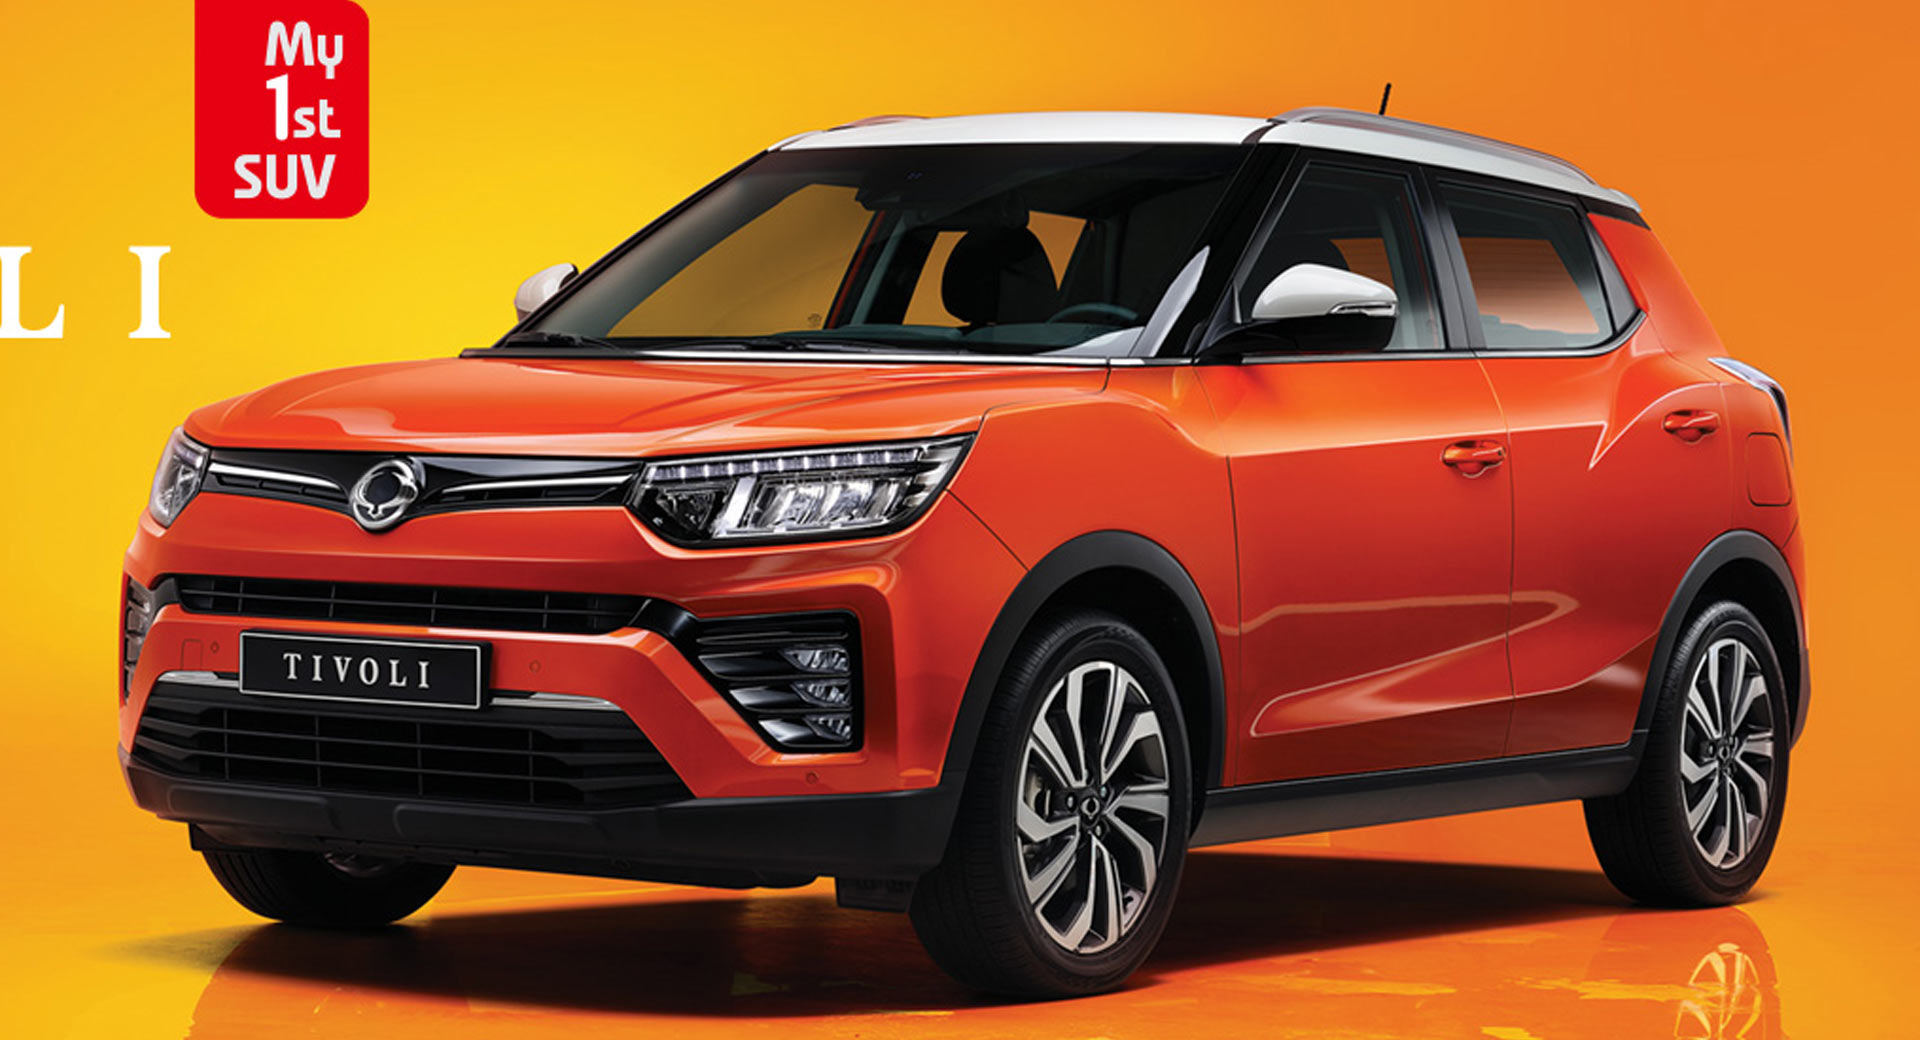 Facelifted SsangYong Tivoli Bows In Korea With New Turbo Engine | Carscoops